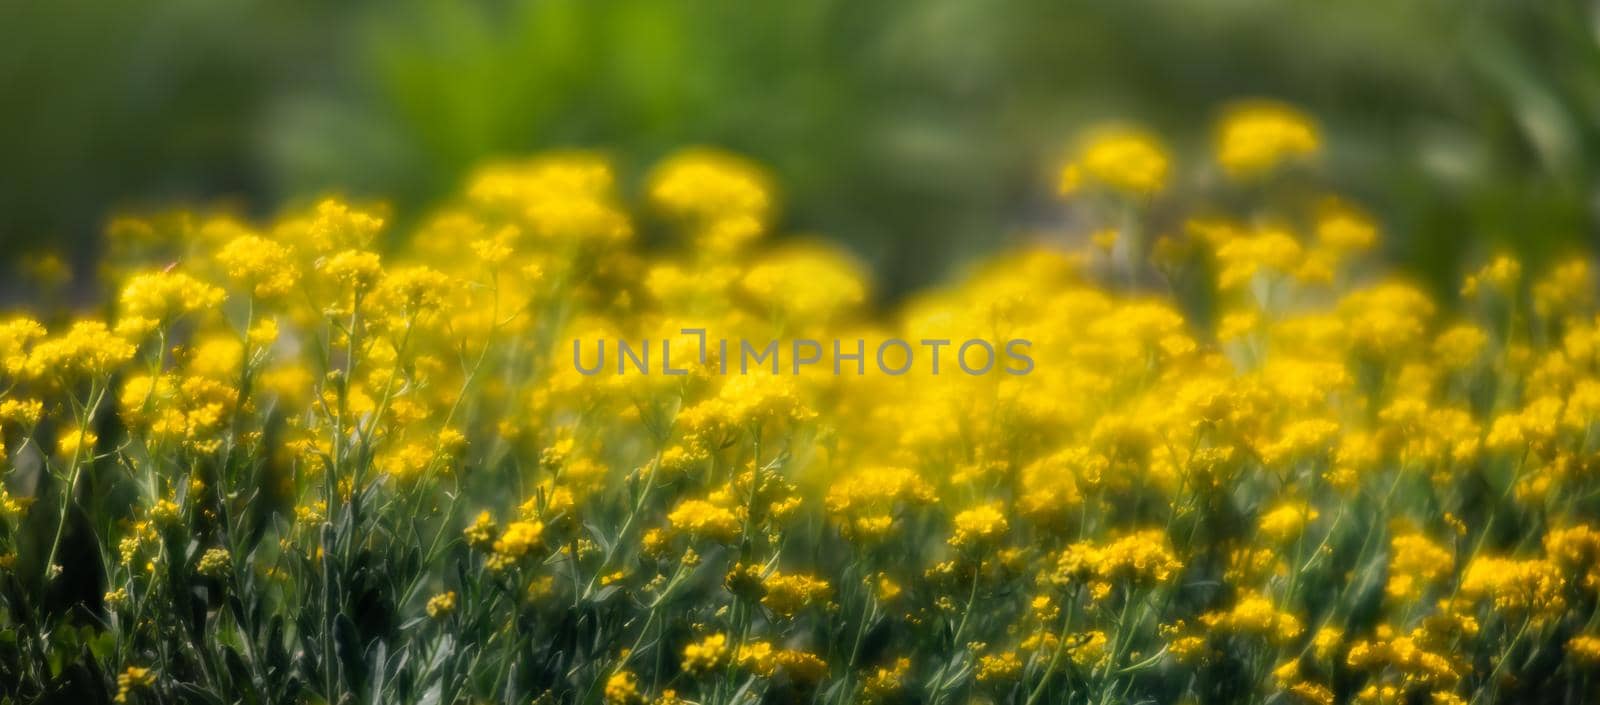 Soft focus image of small yellow flowers of aurinia saxatilis in the spring time in the garden. Common names include basket of gold, goldentuft alyssum, golden alison, gold-dust, rock madwort